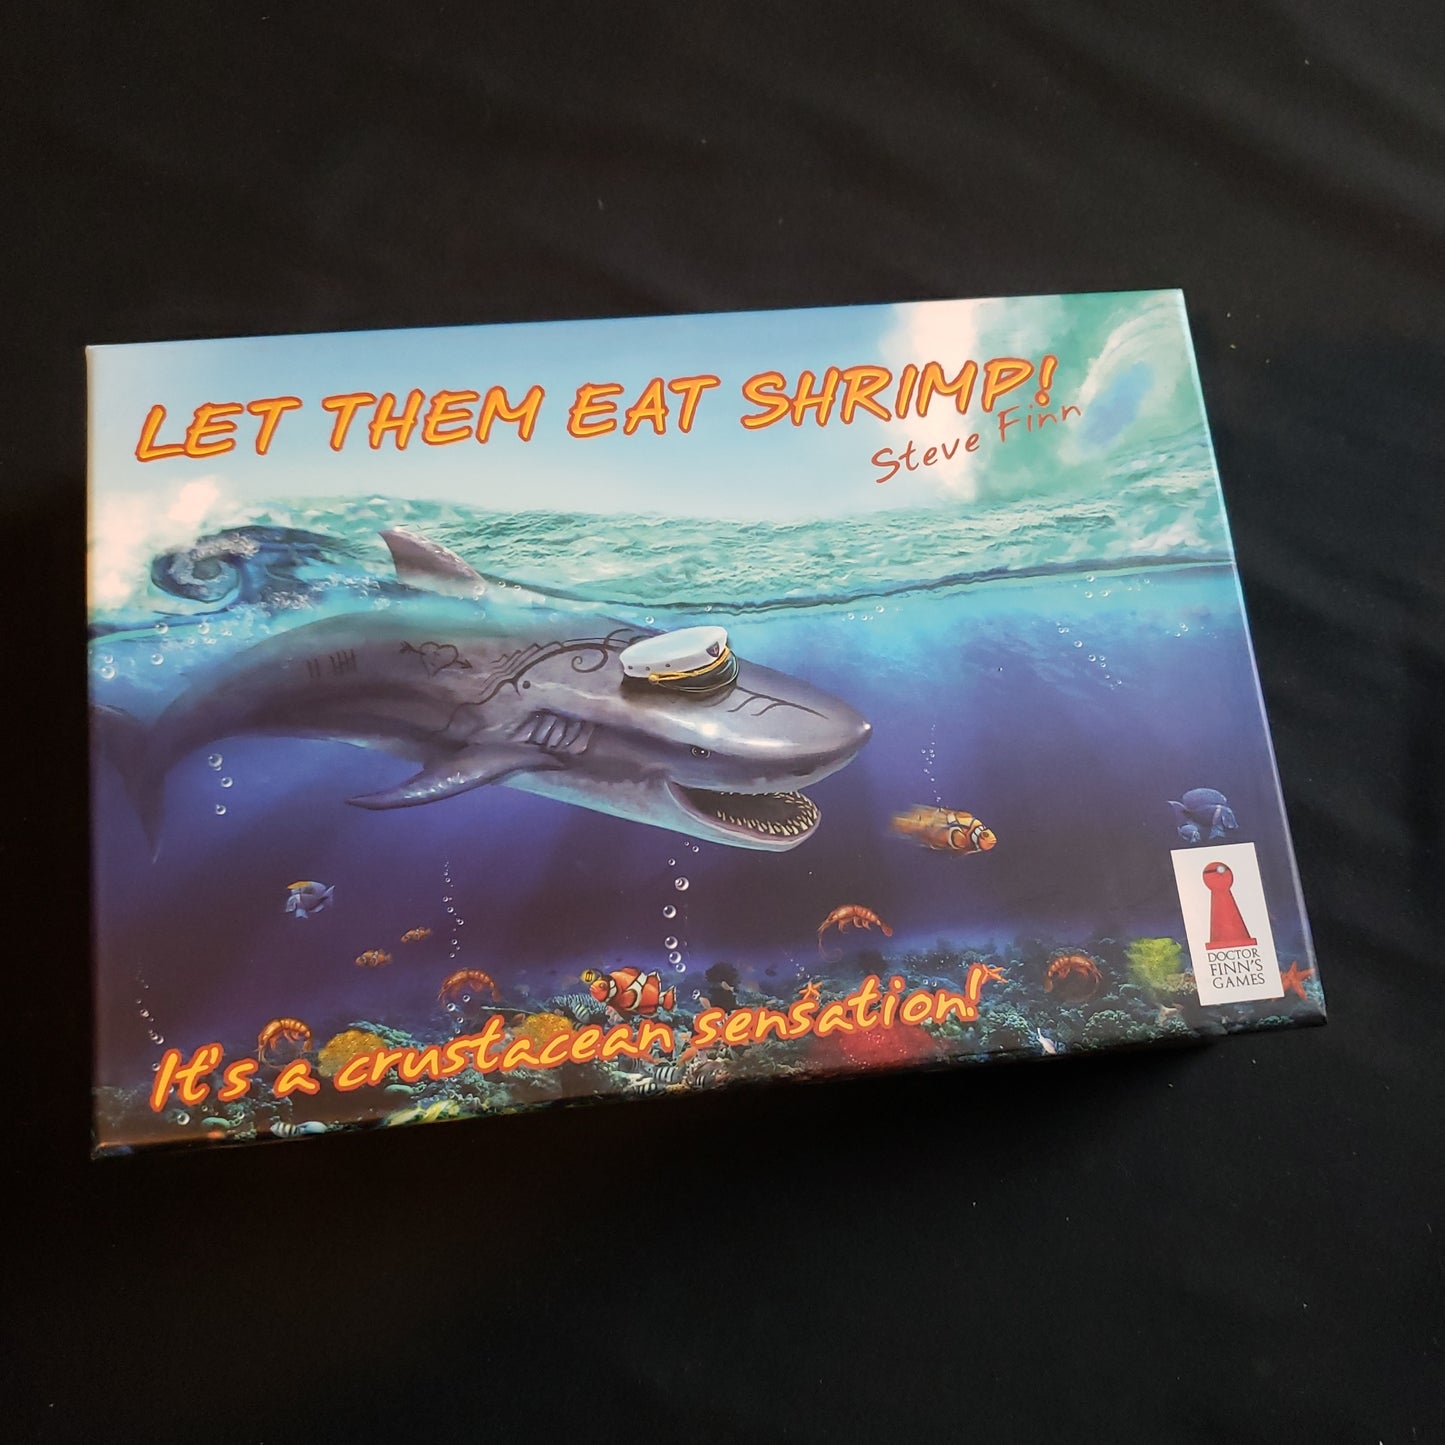 Image shows the front cover of the box of the Let Them Eat Shrimp! board game